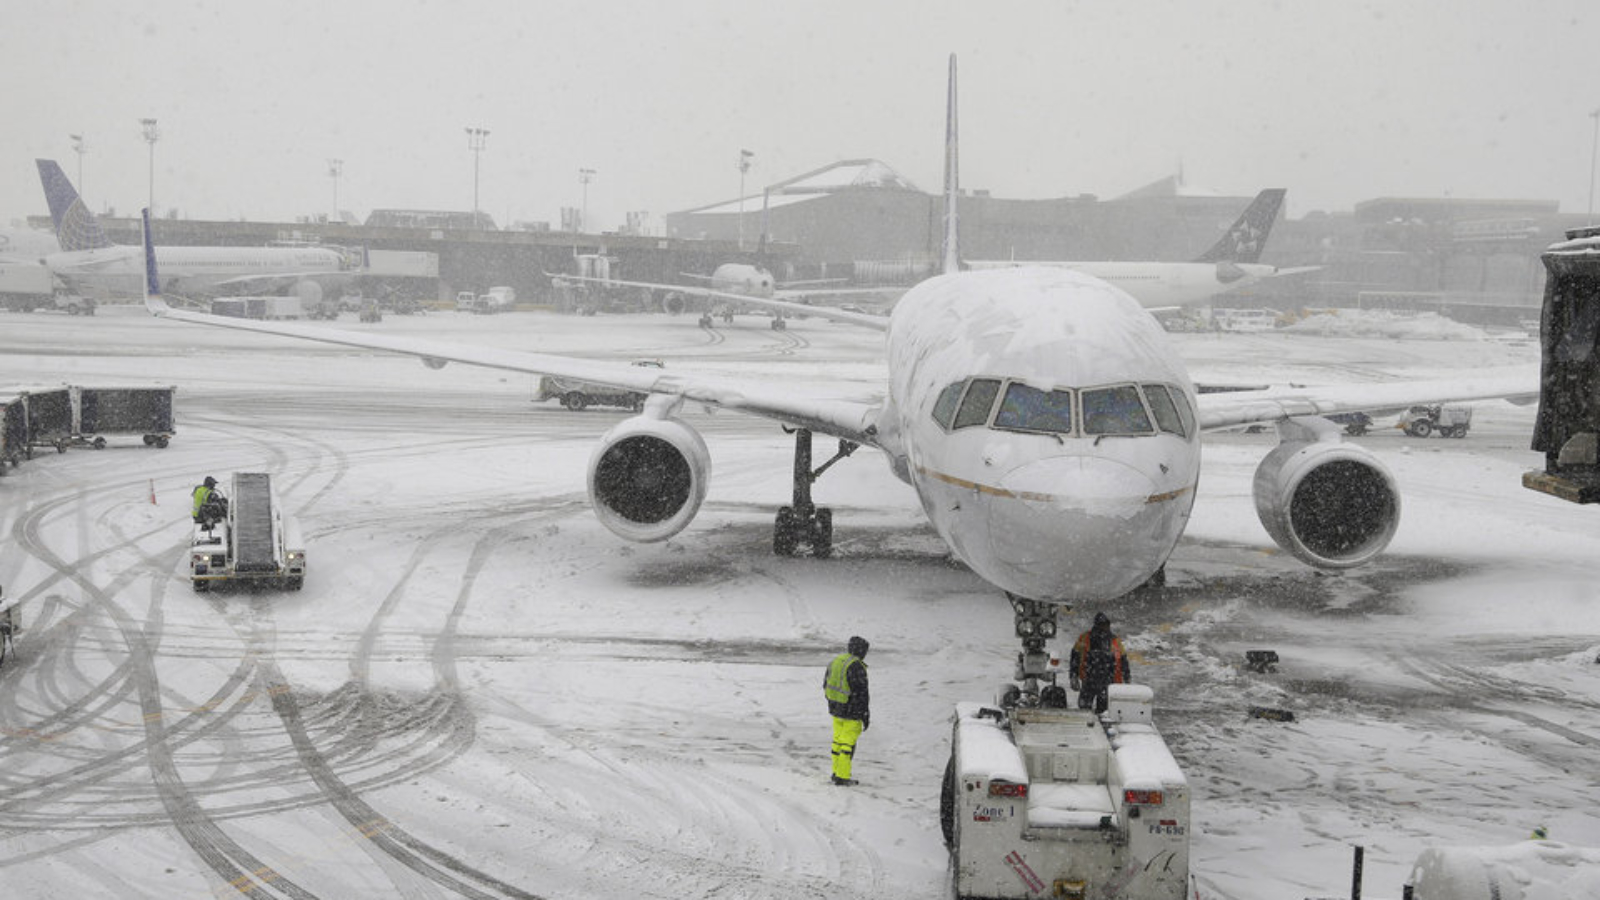 A United Airlines airplane is prepared to be  pushed back from a gate Monday, Feb. 3, 2014, at Newark Liberty International Airport in Newark, NJ. A winter storm one day after the Super Bowl cancelled or delayed dozens of flights in the region. (AP Photo/Ted S. Warren) ** Usable by LA and DC Only **